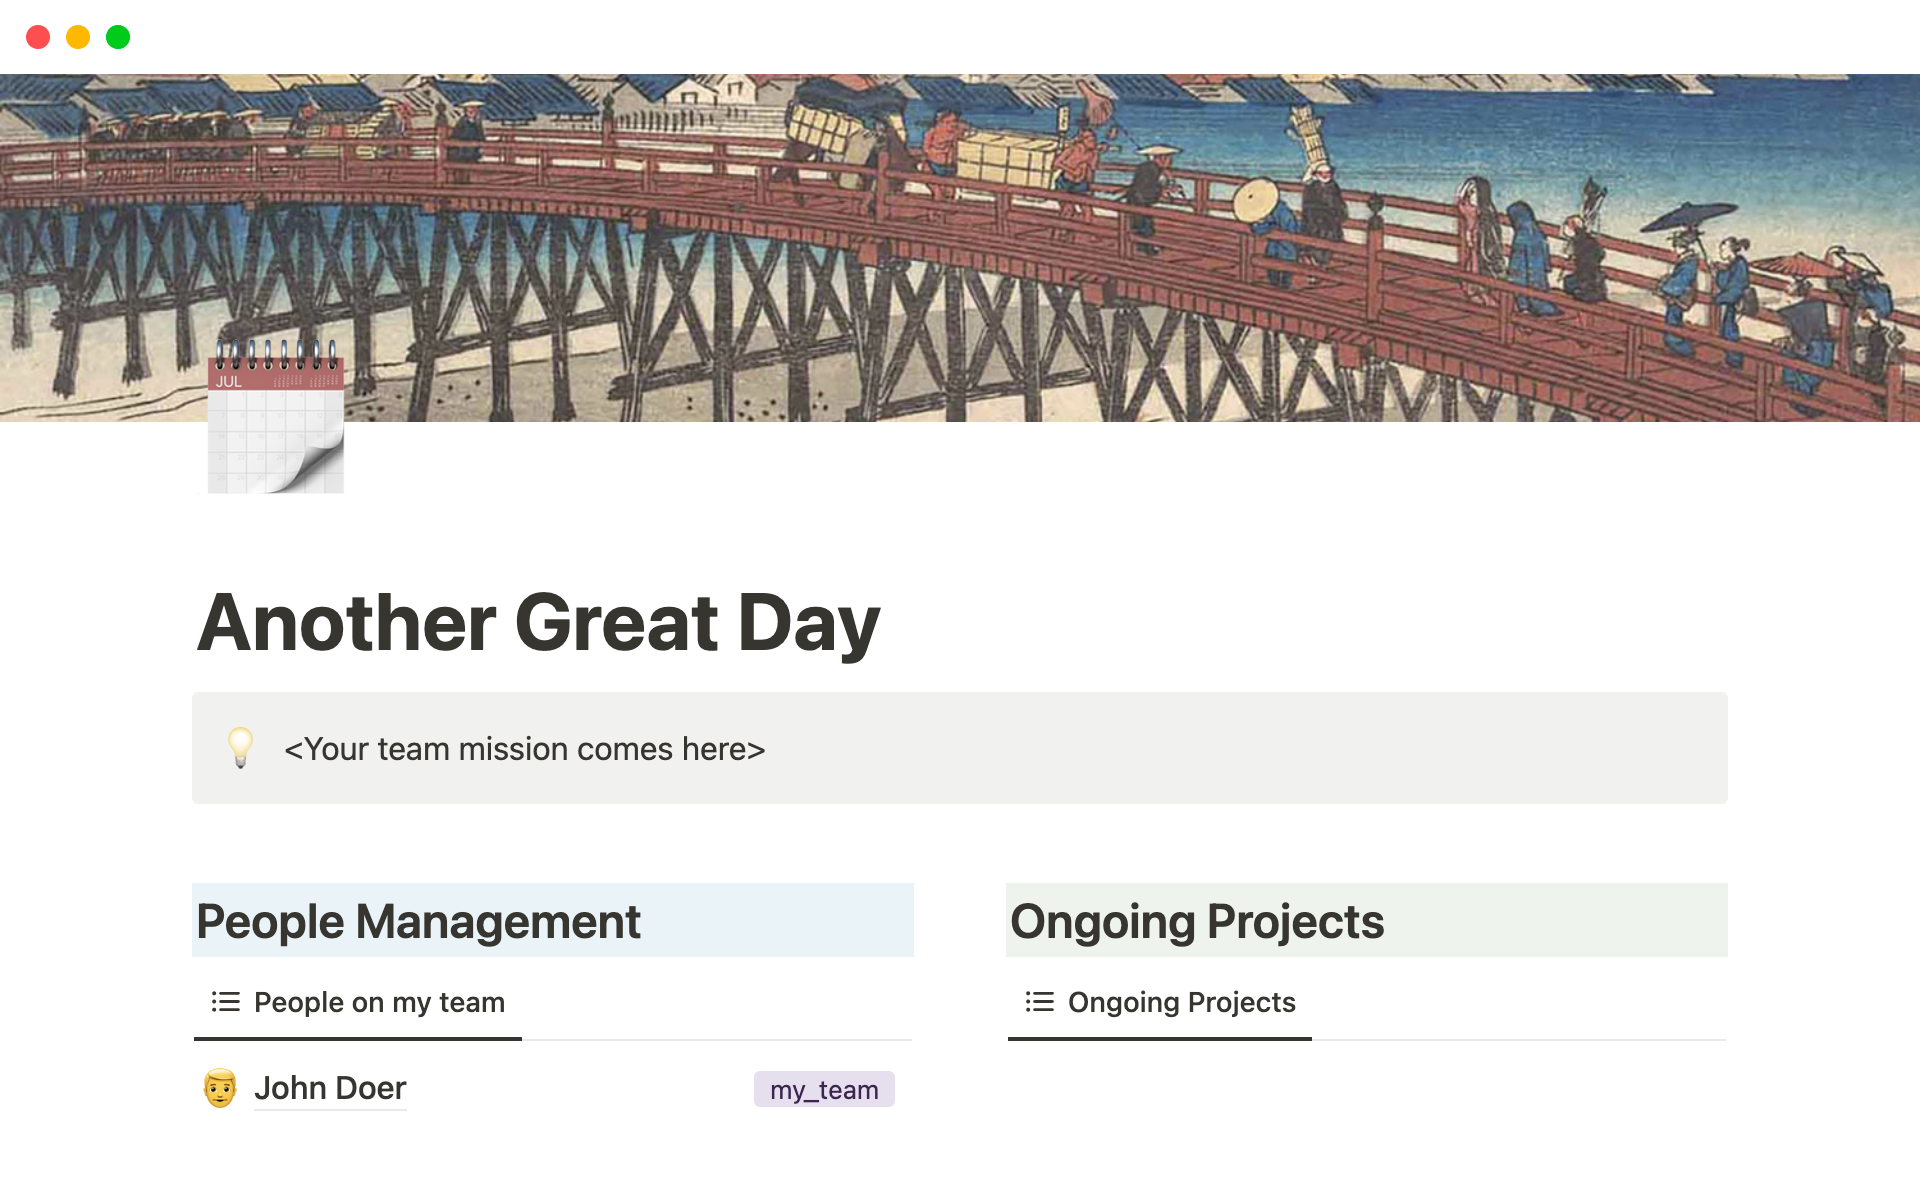 This template offers a complete set of tools for people and project management.